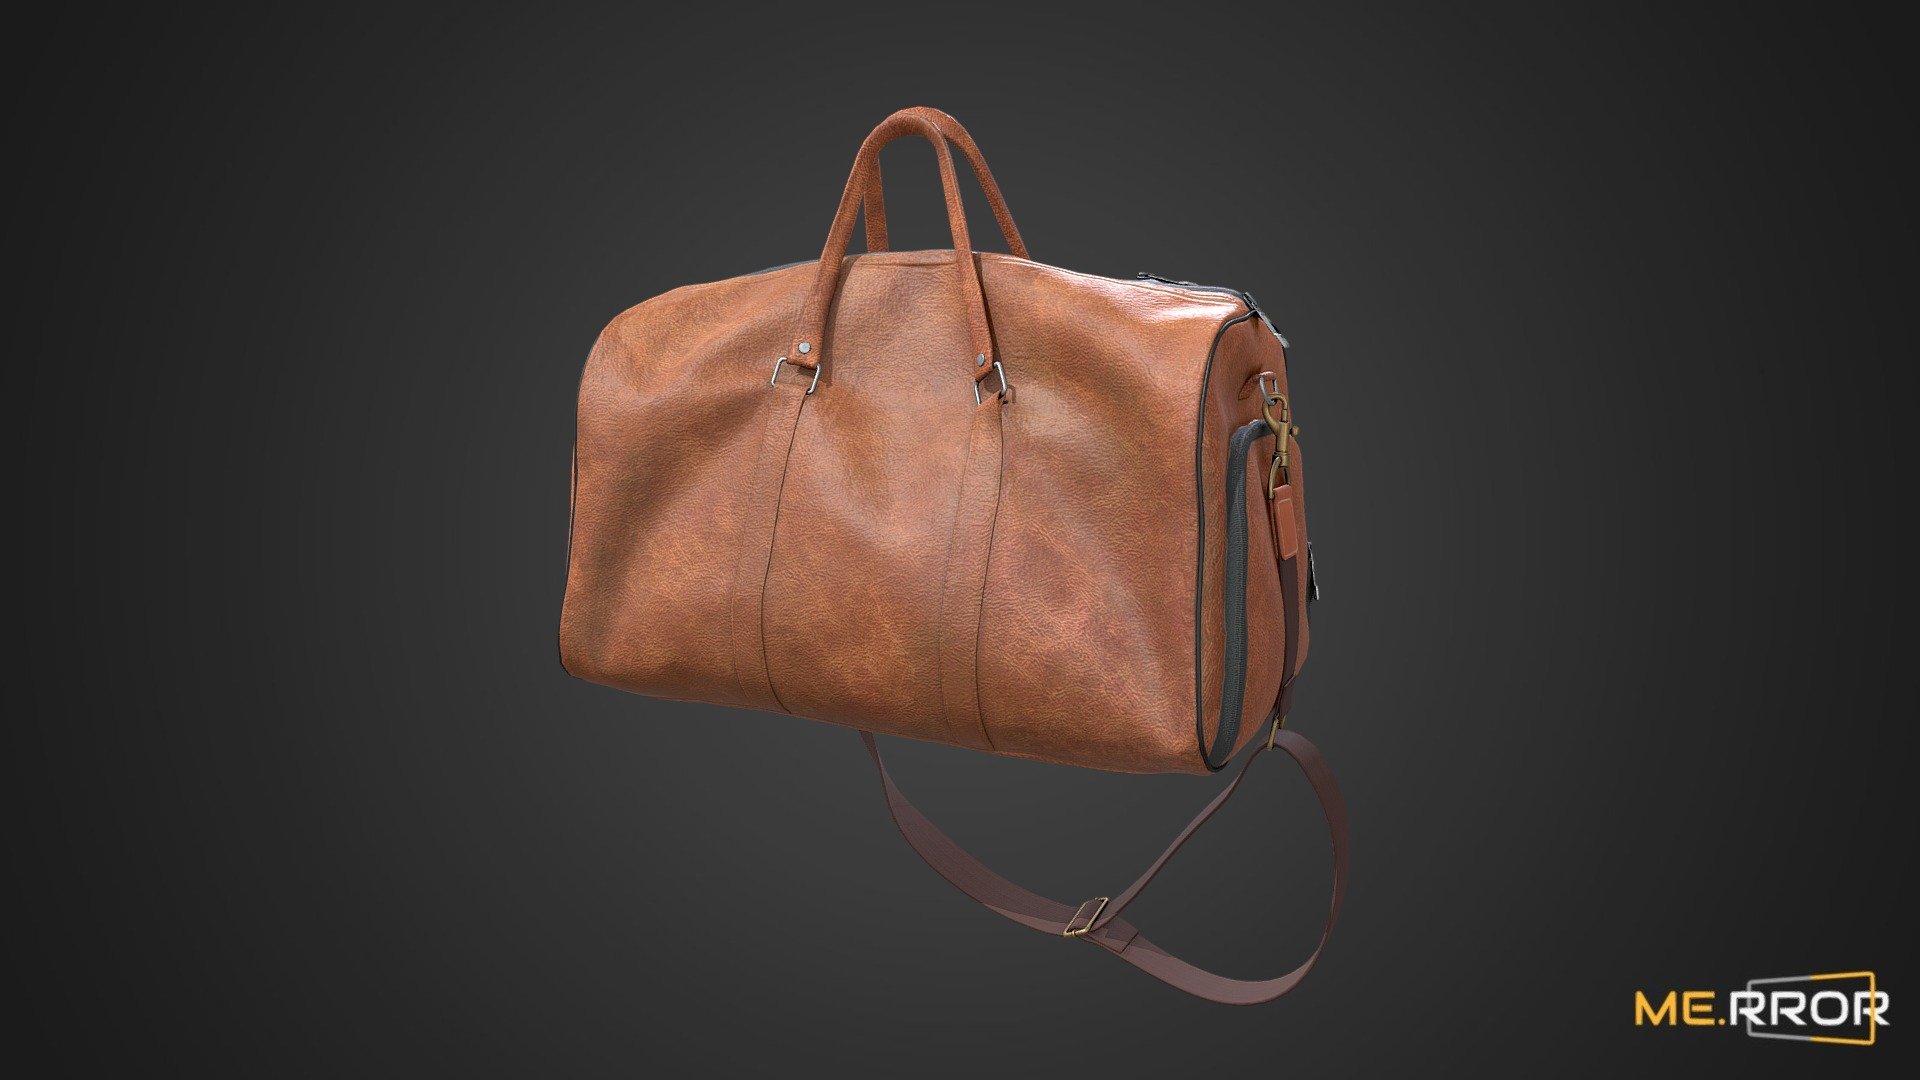 MERROR is a 3D Content PLATFORM which introduces various Asian assets to the 3D world


3DScanning #Photogrametry #ME.RROR - [Game-Ready] Leather bag - Buy Royalty Free 3D model by ME.RROR Studio (@merror) 3d model